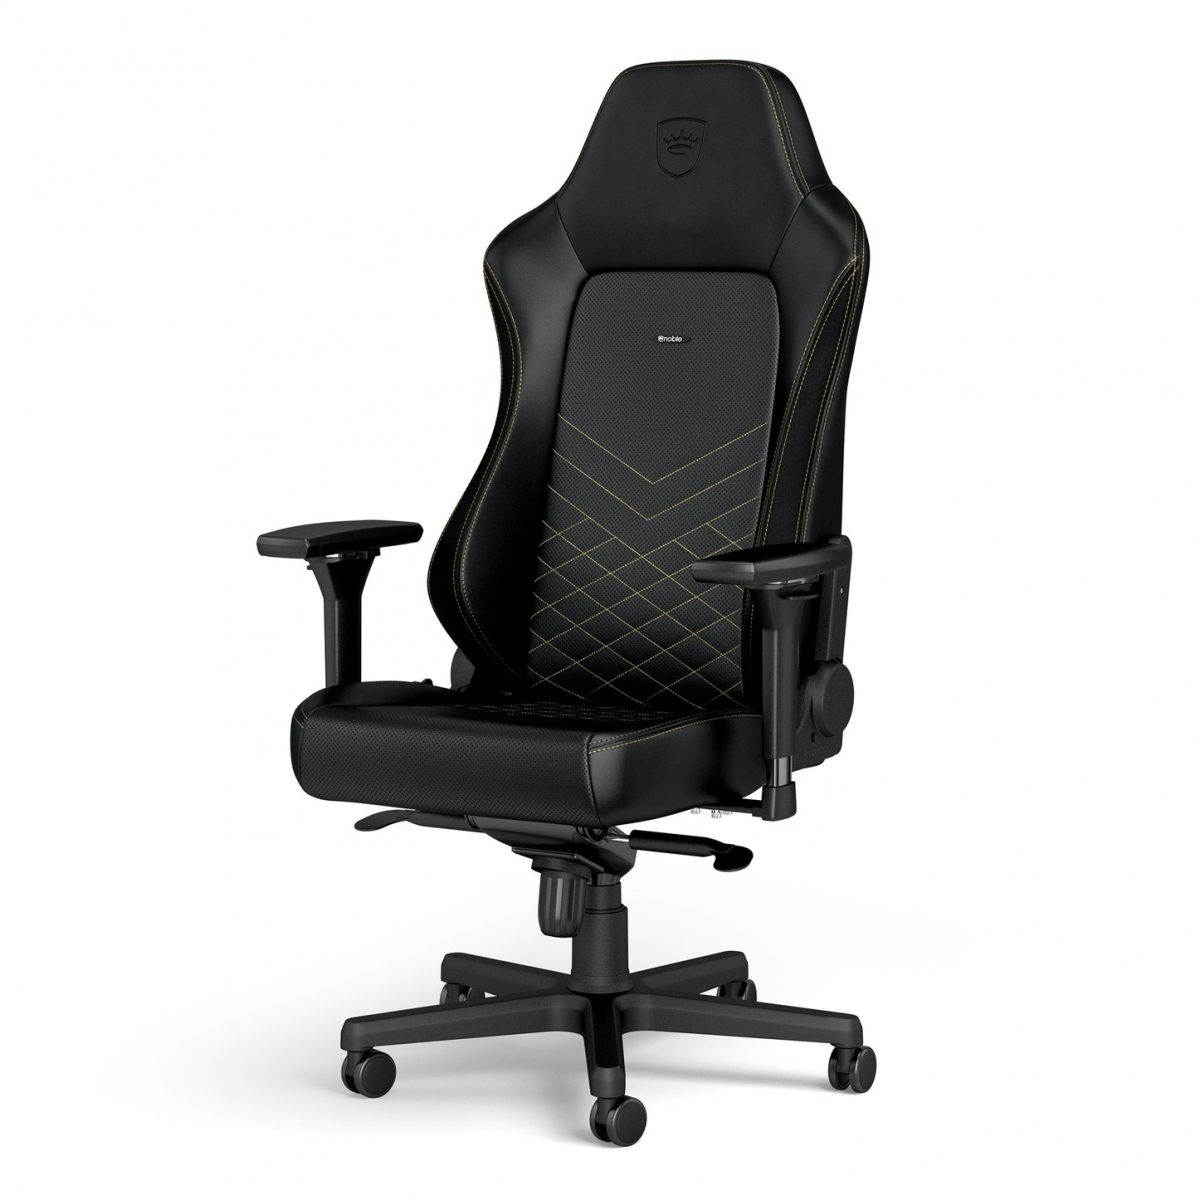 noblechairs HERO Gaming Chair - cold foam, steel armrests,  60mm casters, 150kg - black/gold - CASEKING 2.35.63.01.011